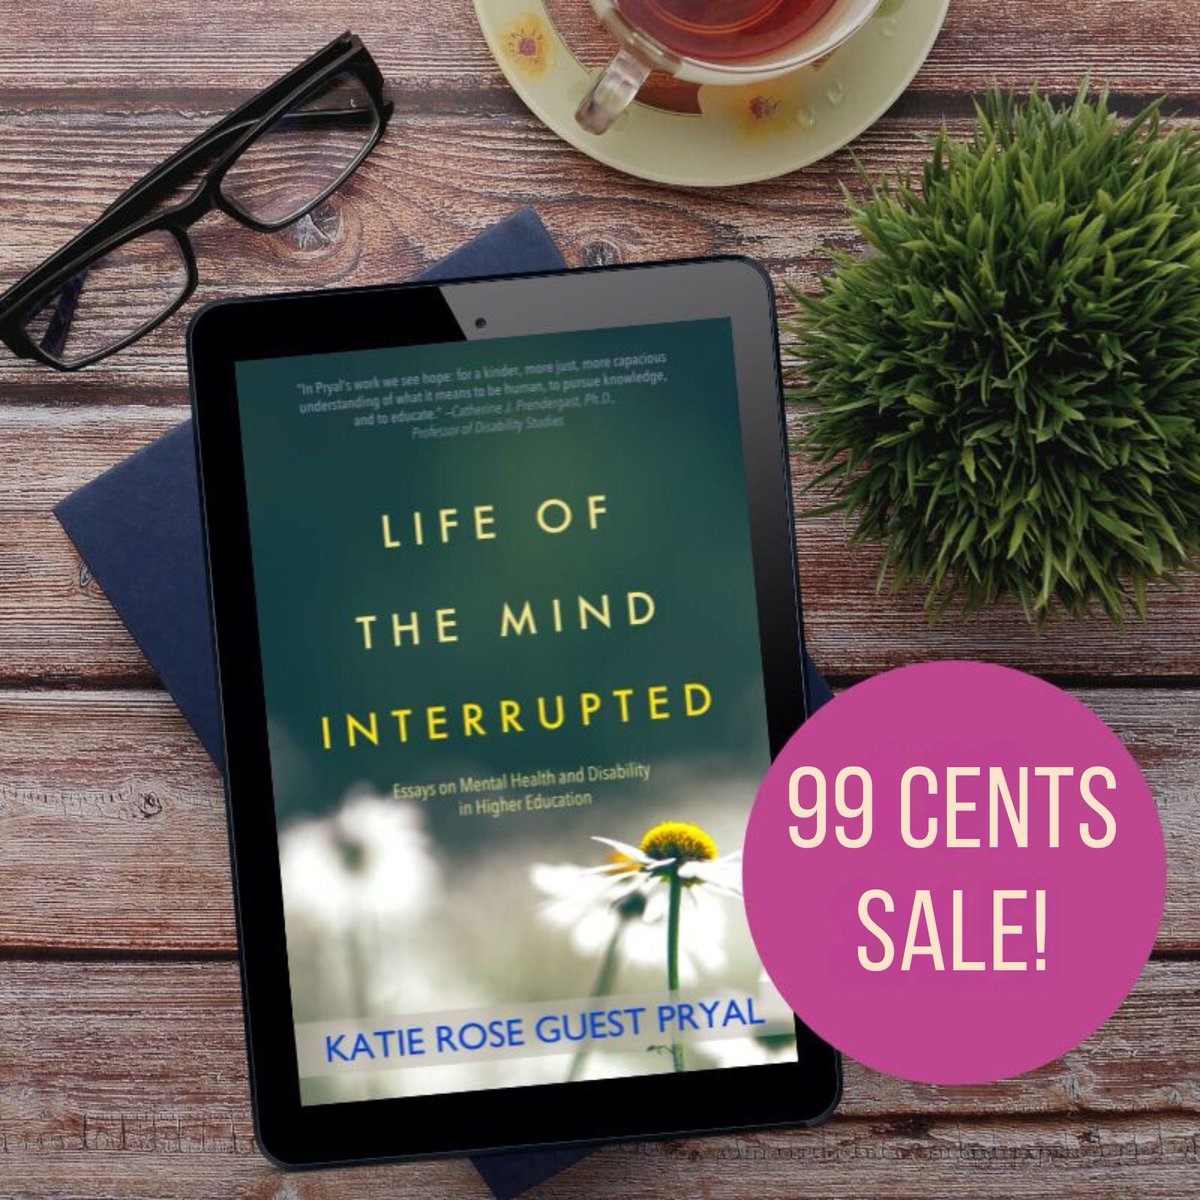 My first book on #mentalhealth that I published, 'Life of the Mind Interrupted,' changed my life. I was able to talk openly about mental health struggles and built a community around this book. This week, it's 99c on ebook. #neurodiversity #bipolar #autism #adhd #kindledeal